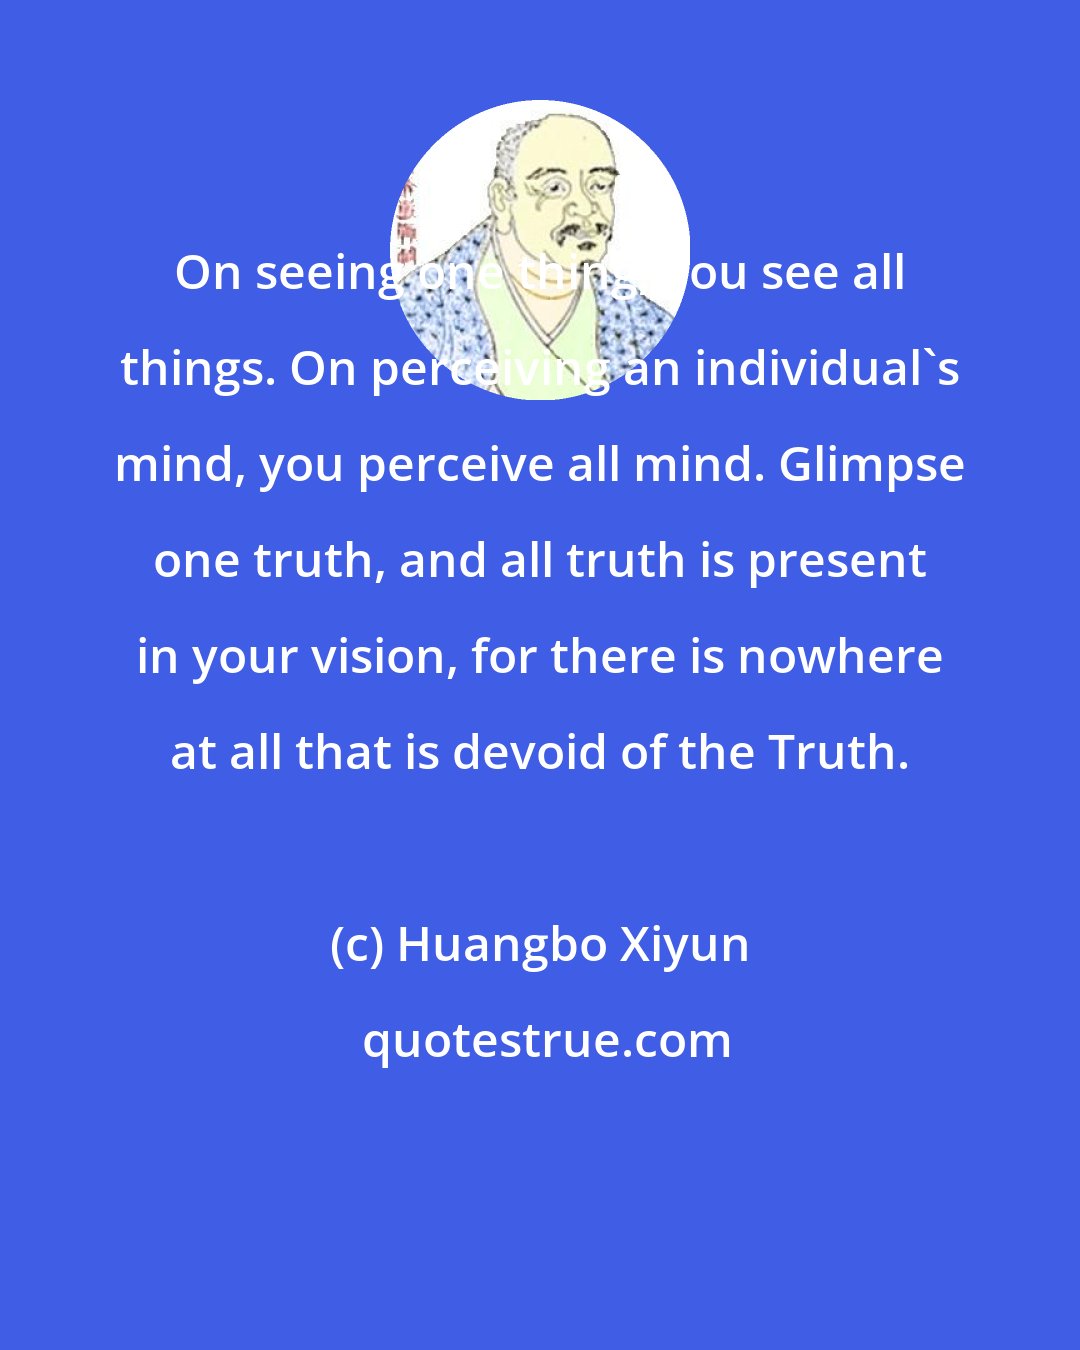 Huangbo Xiyun: On seeing one thing, you see all things. On perceiving an individual's mind, you perceive all mind. Glimpse one truth, and all truth is present in your vision, for there is nowhere at all that is devoid of the Truth.